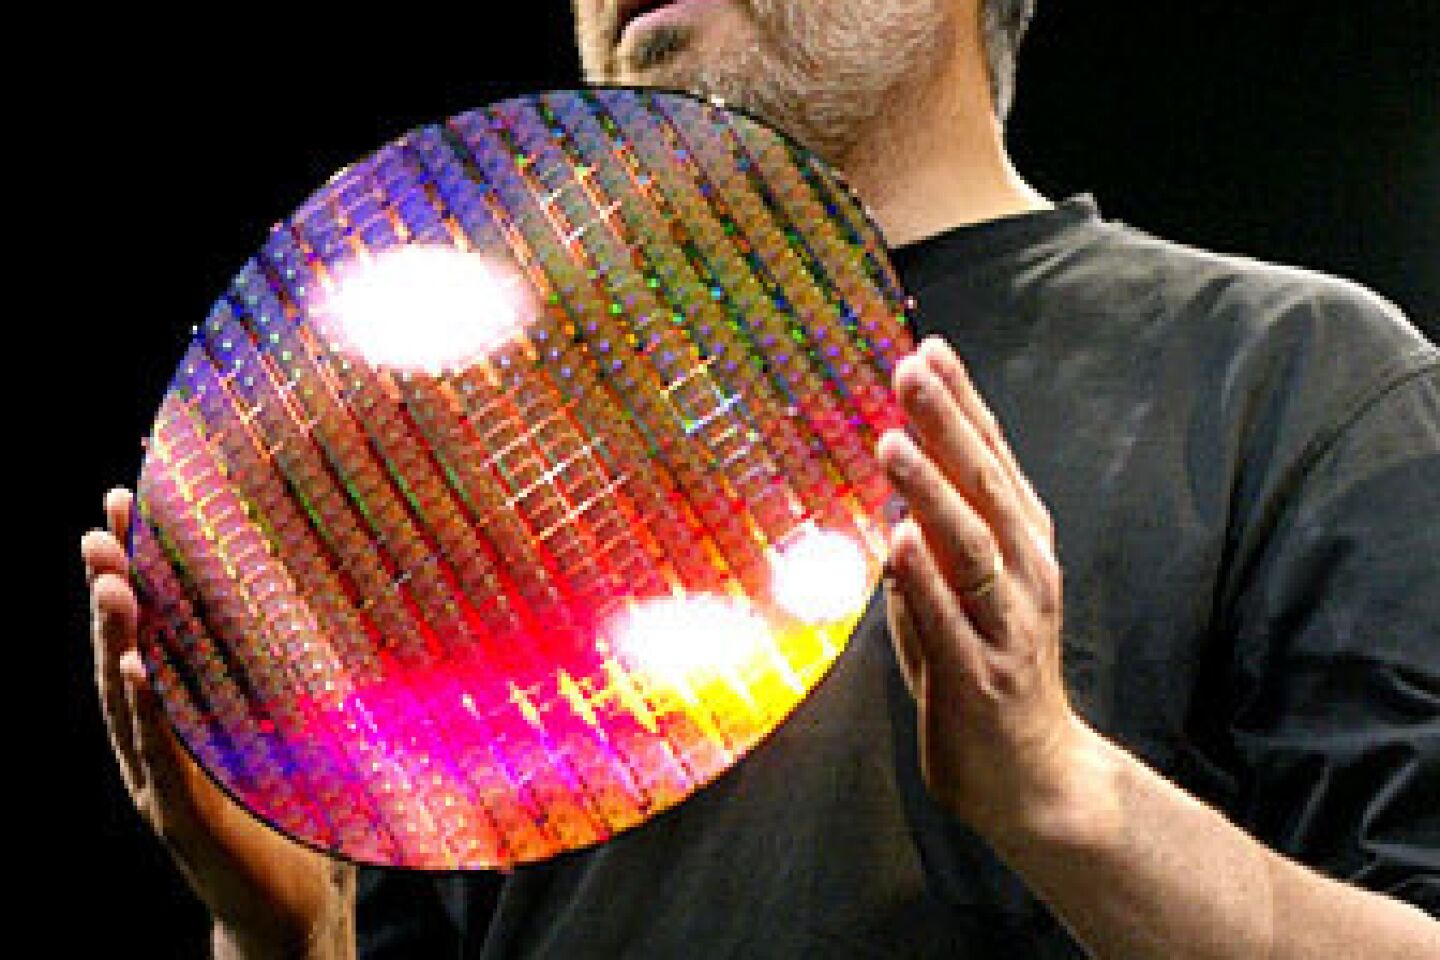 Apple Computer Inc. chief executive Steve Jobs holds the new IBM processor used by the new Apple G5 computer at the Apple Worldwide Developers Conference in San Francisco, Monday, June 23, 2003. Jobs gave the keynote speech that introduced OS X operating system, code-name Panther.